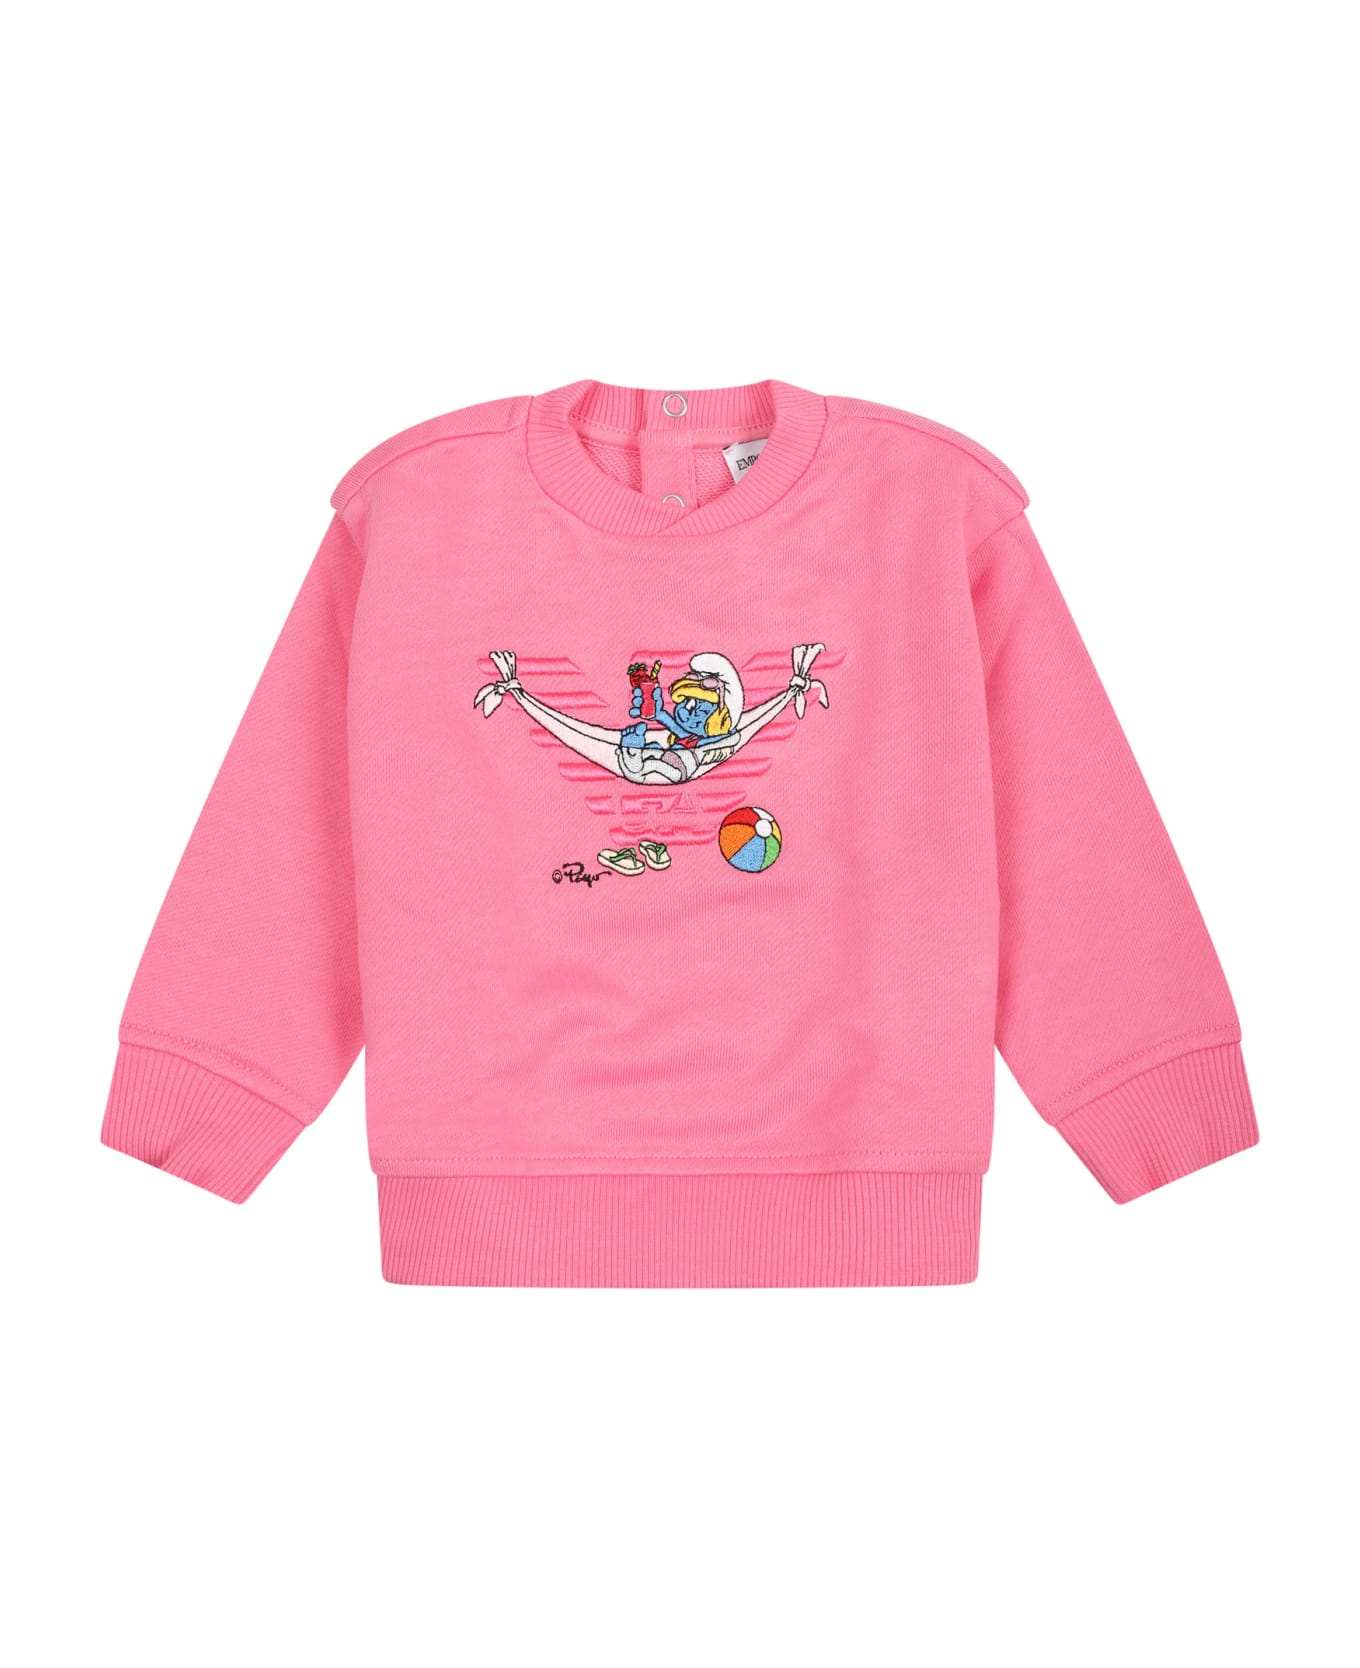 Emporio Armani Pink Sweatshirt For Baby Girl With The Smurfs - Pink